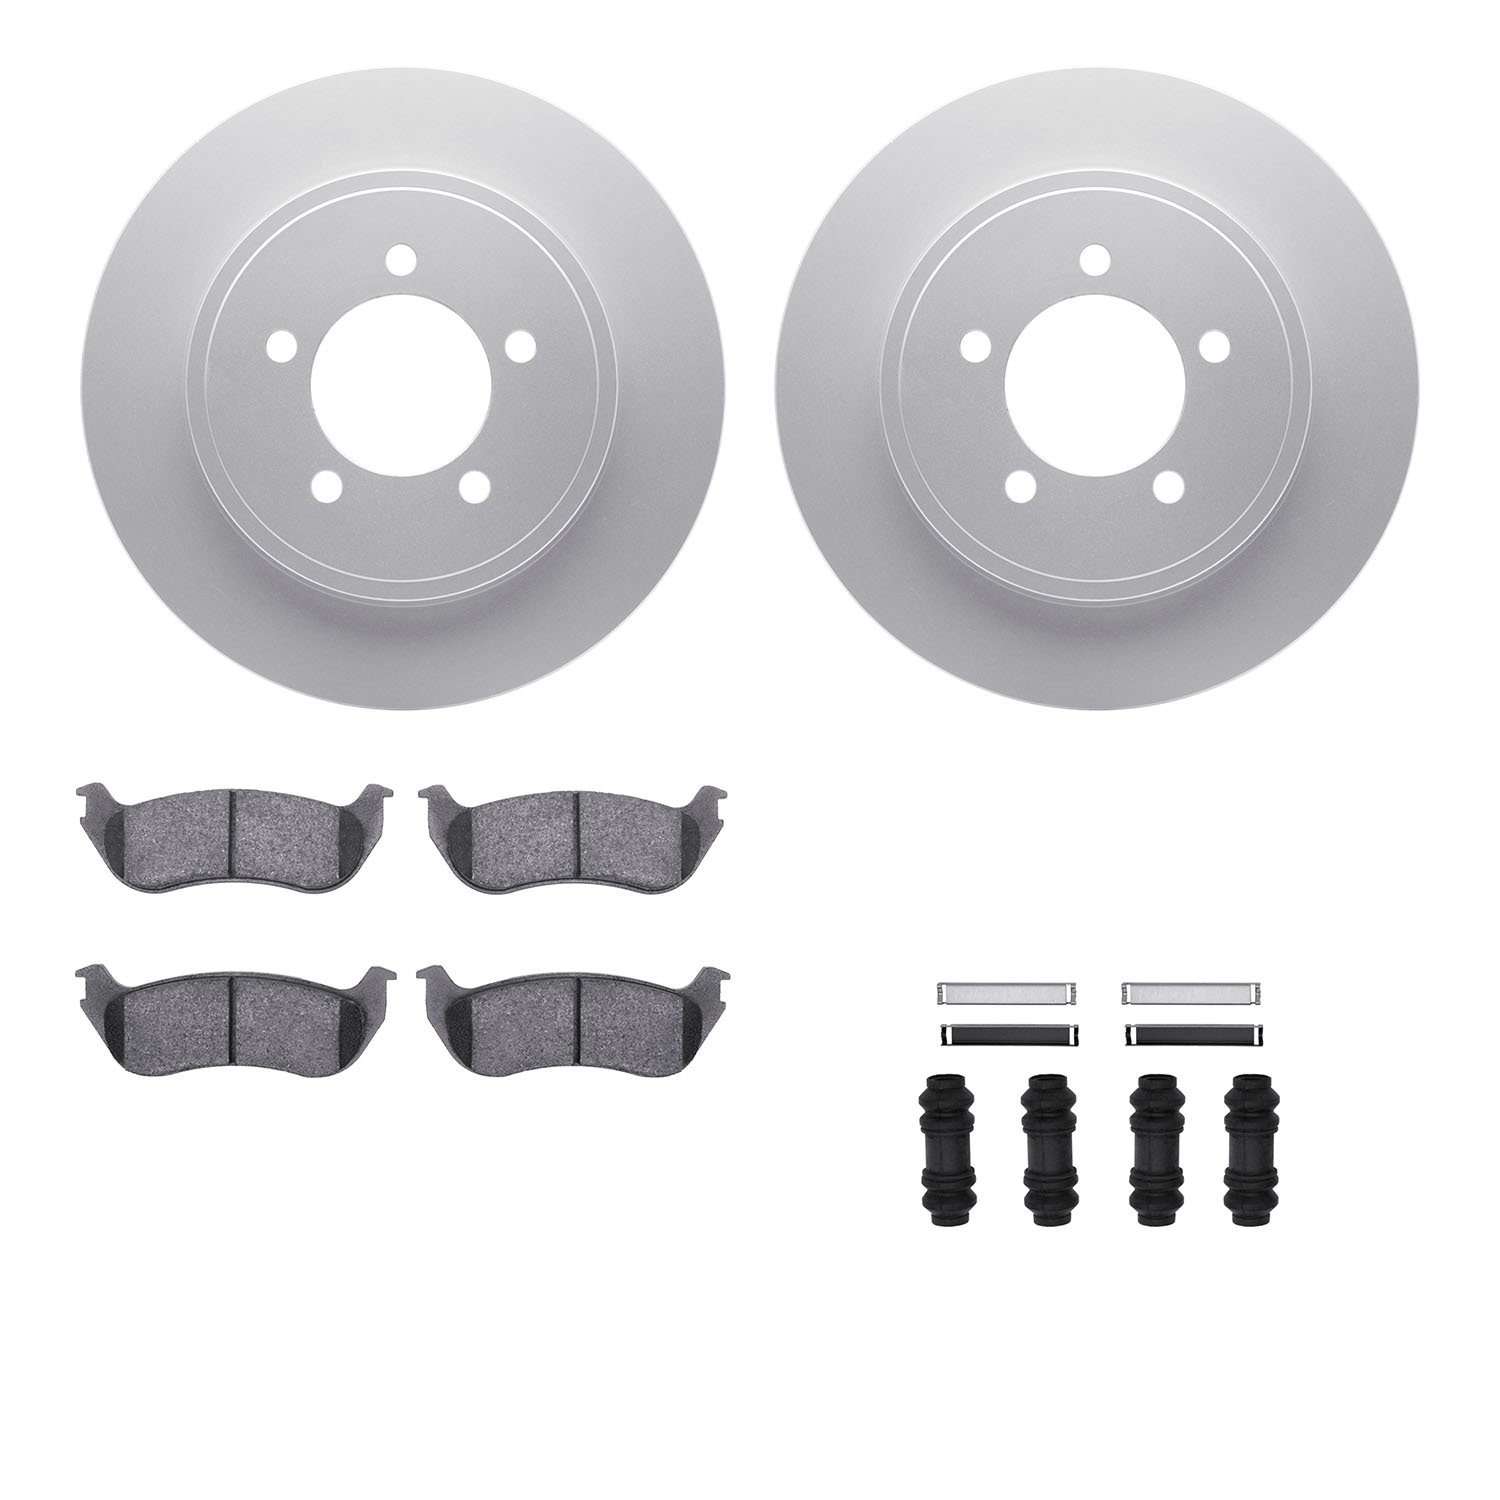 4412-54040 Geospec Brake Rotors with Ultimate-Duty Brake Pads & Hardware, 2002-2005 Ford/Lincoln/Mercury/Mazda, Position: Rear